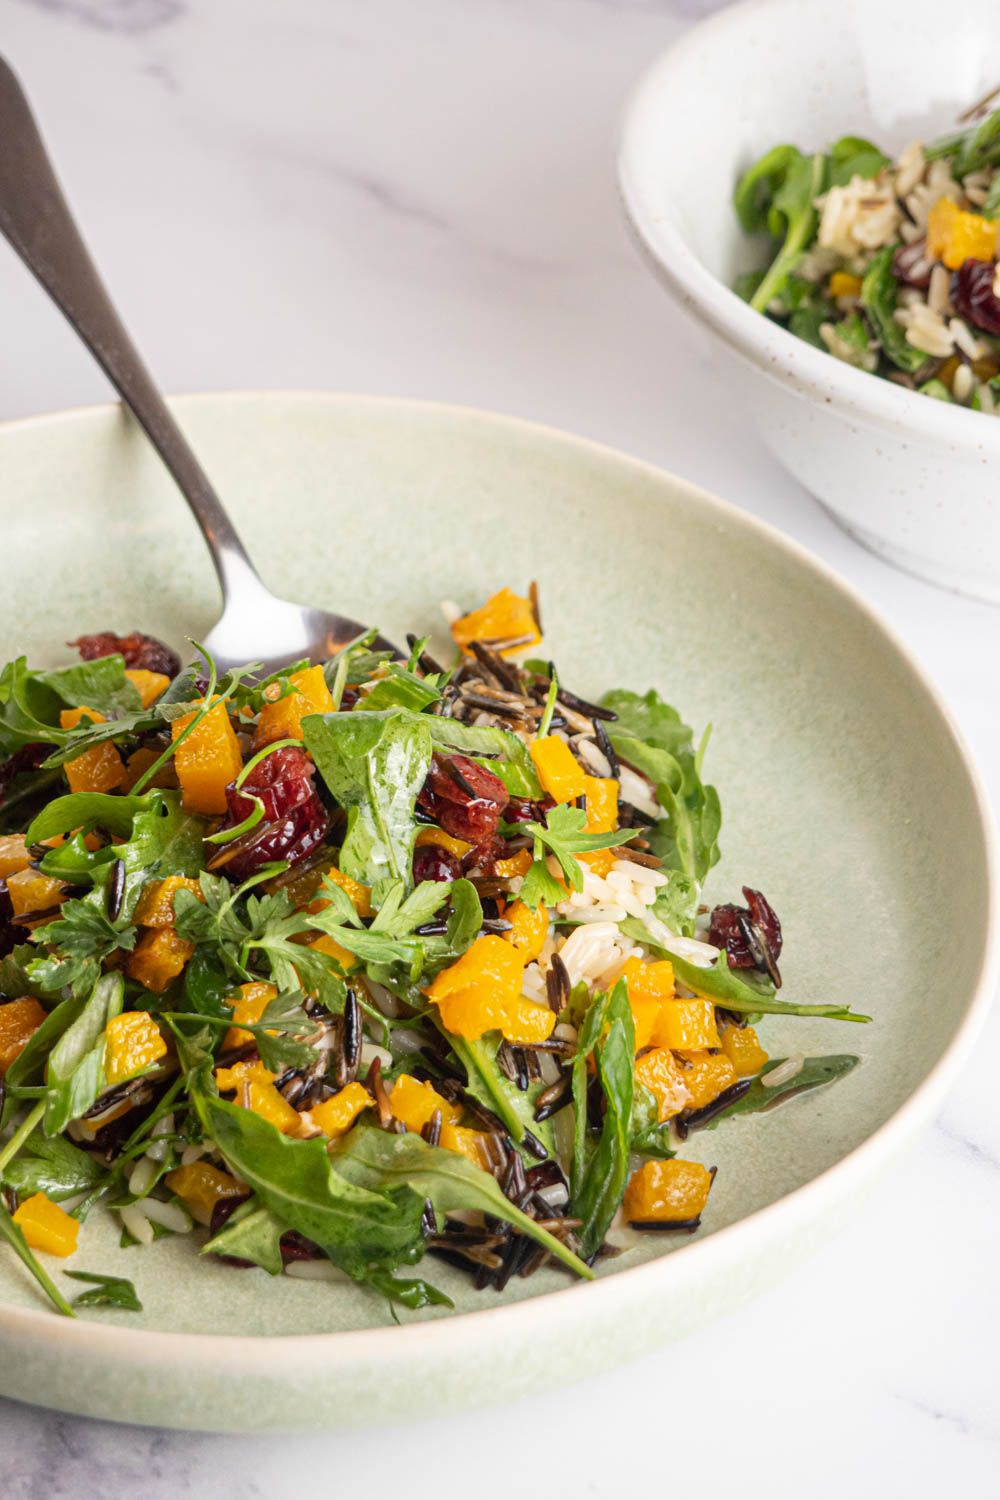 Salad with wild rice, acorn squash, cranberries, arugula, green onions, and lemon dressing in a bowl with a fork.